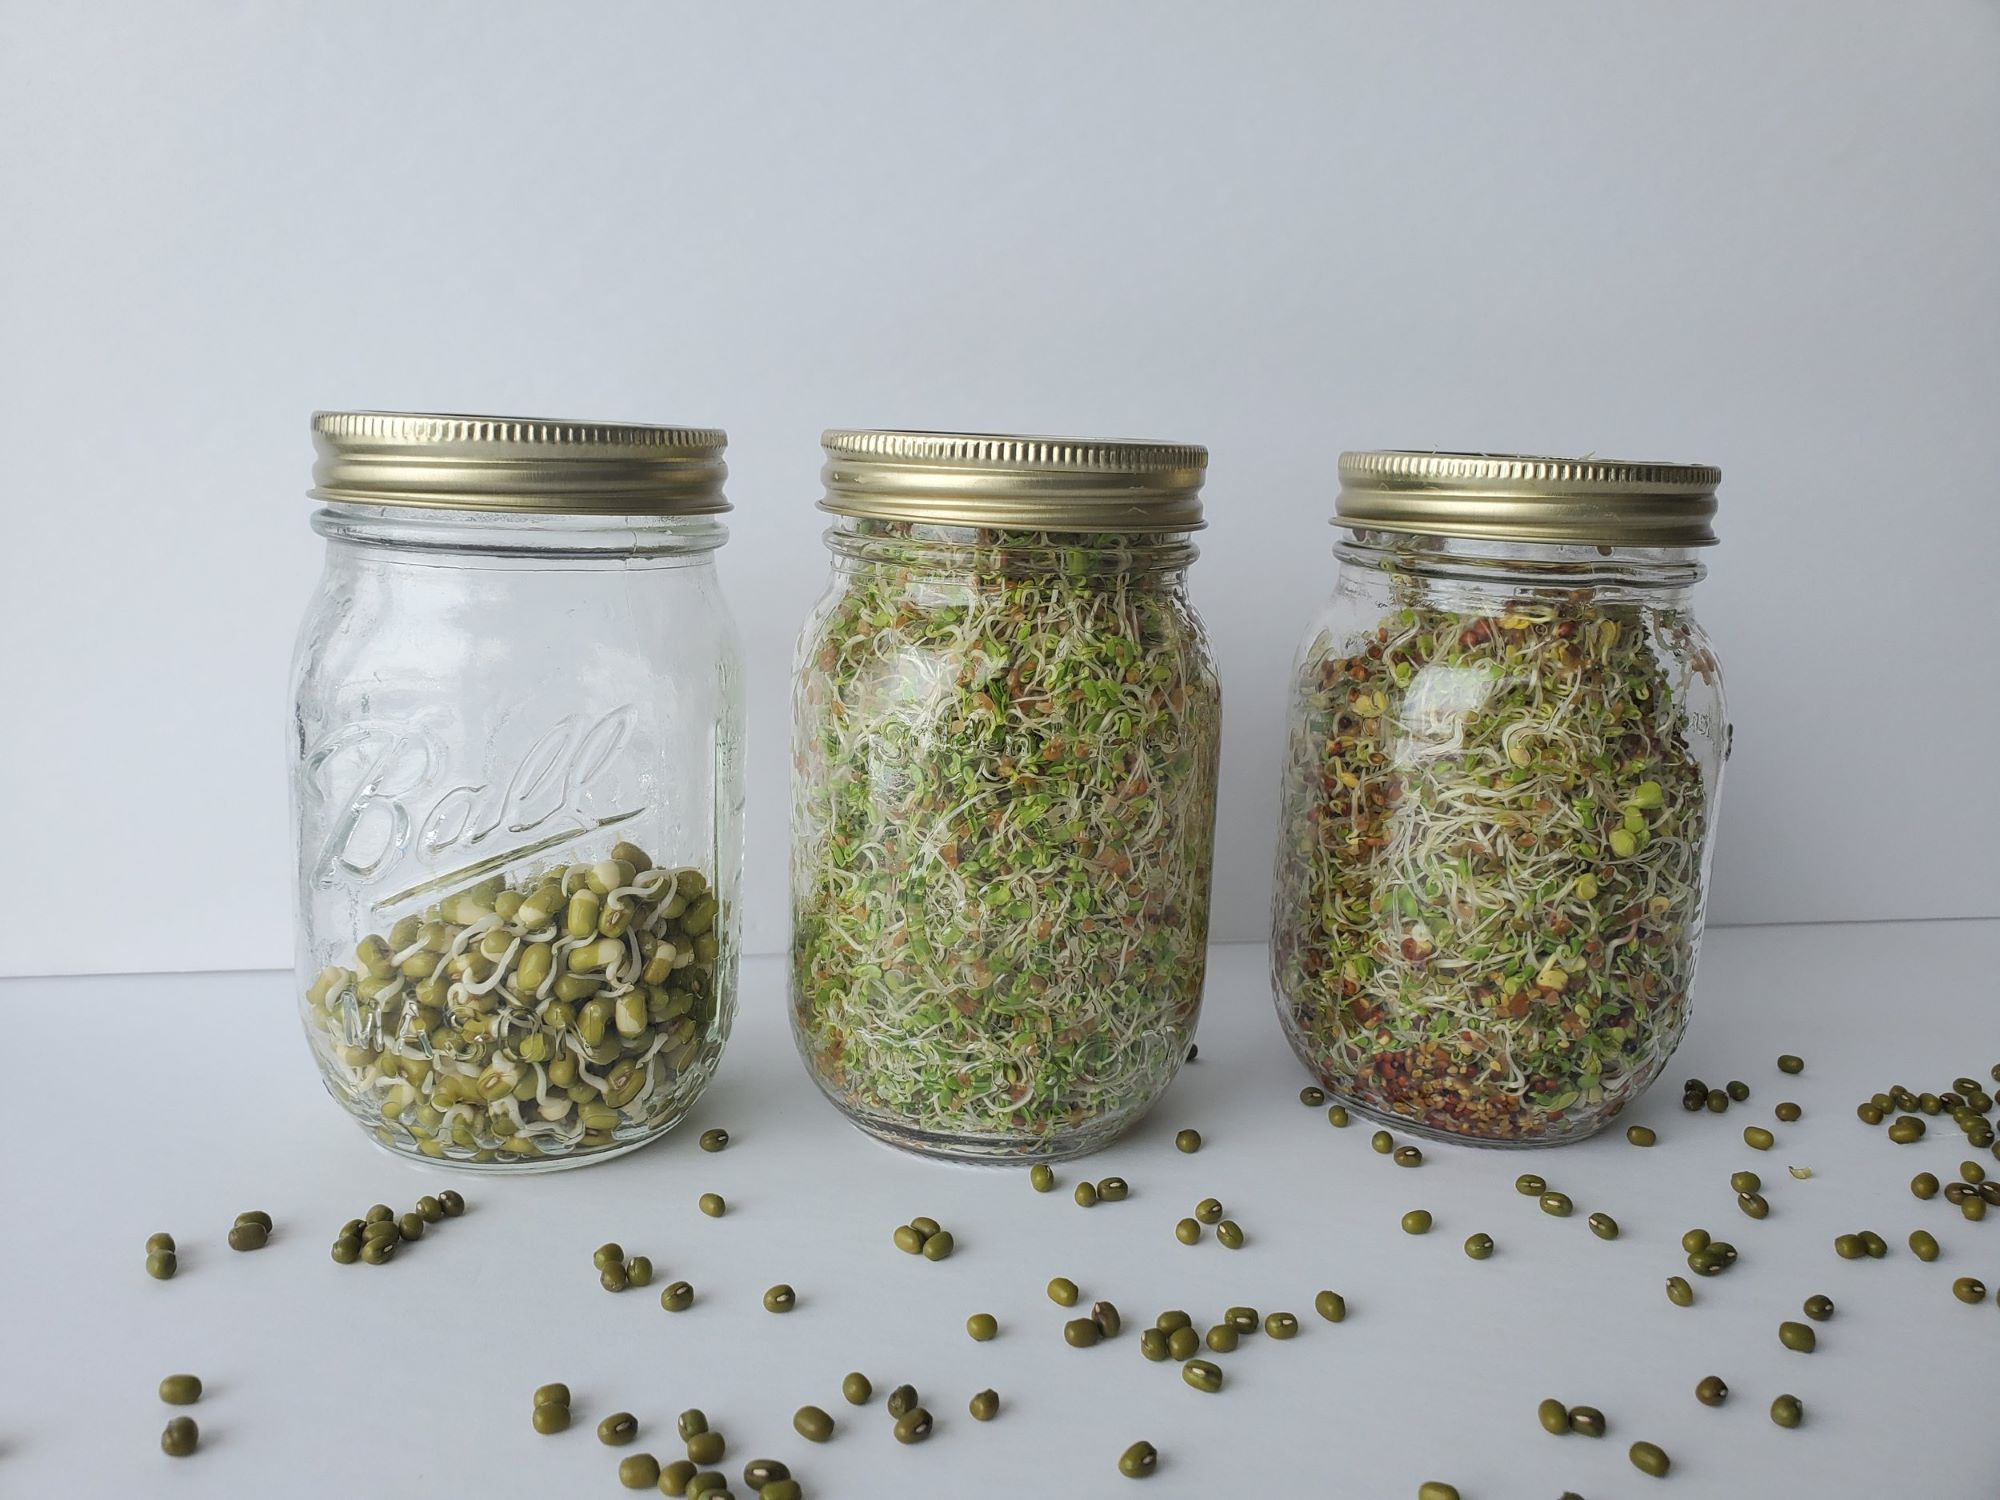 How To Sprout Seeds In A Mason Jar